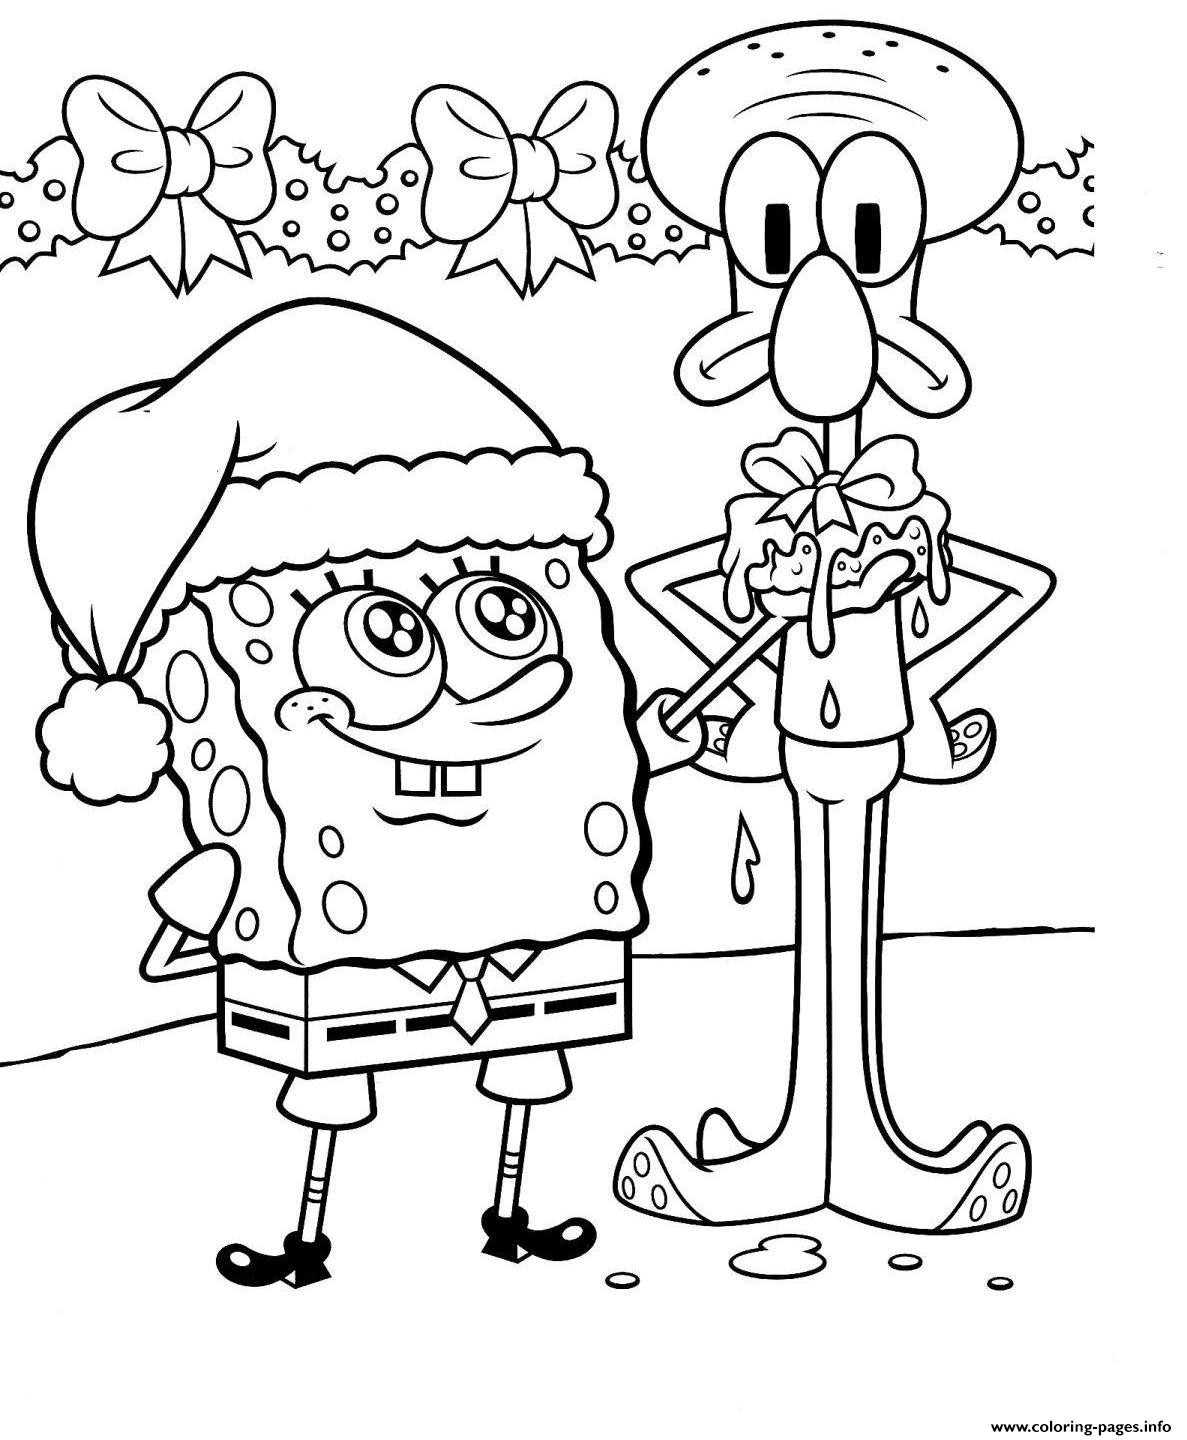 Spongebob Coloring Pages For Kids
 Free Printable Full Size Spongebob Coloring Pages